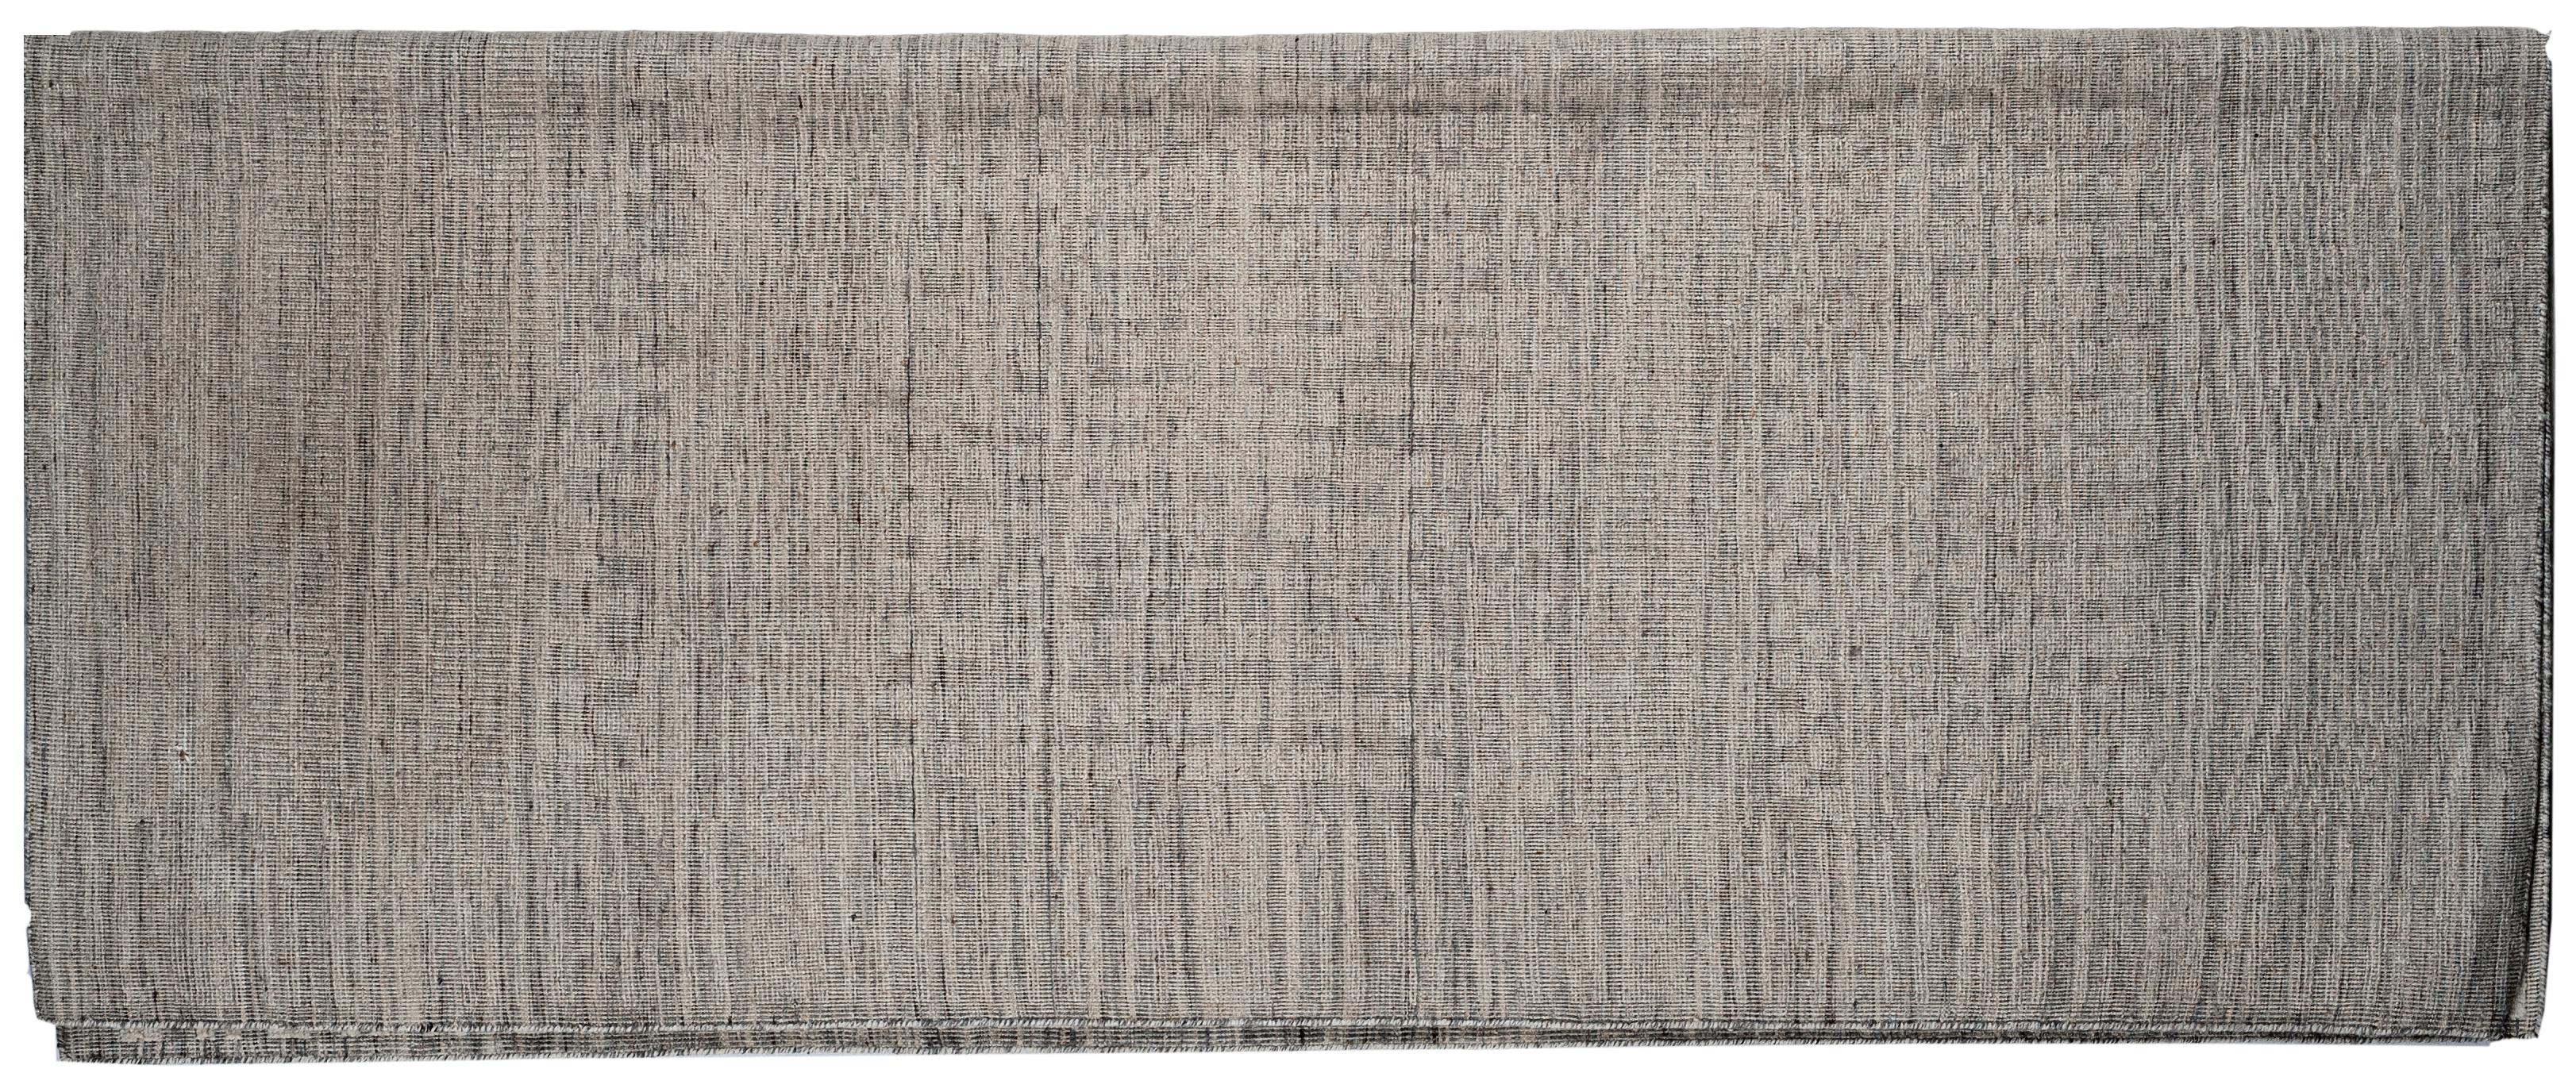 The creative use of cut and looped wool fibers gives this eye-catching area rug a distinct look and enticing feel. Handmade in India using all-natural materials and dyes.